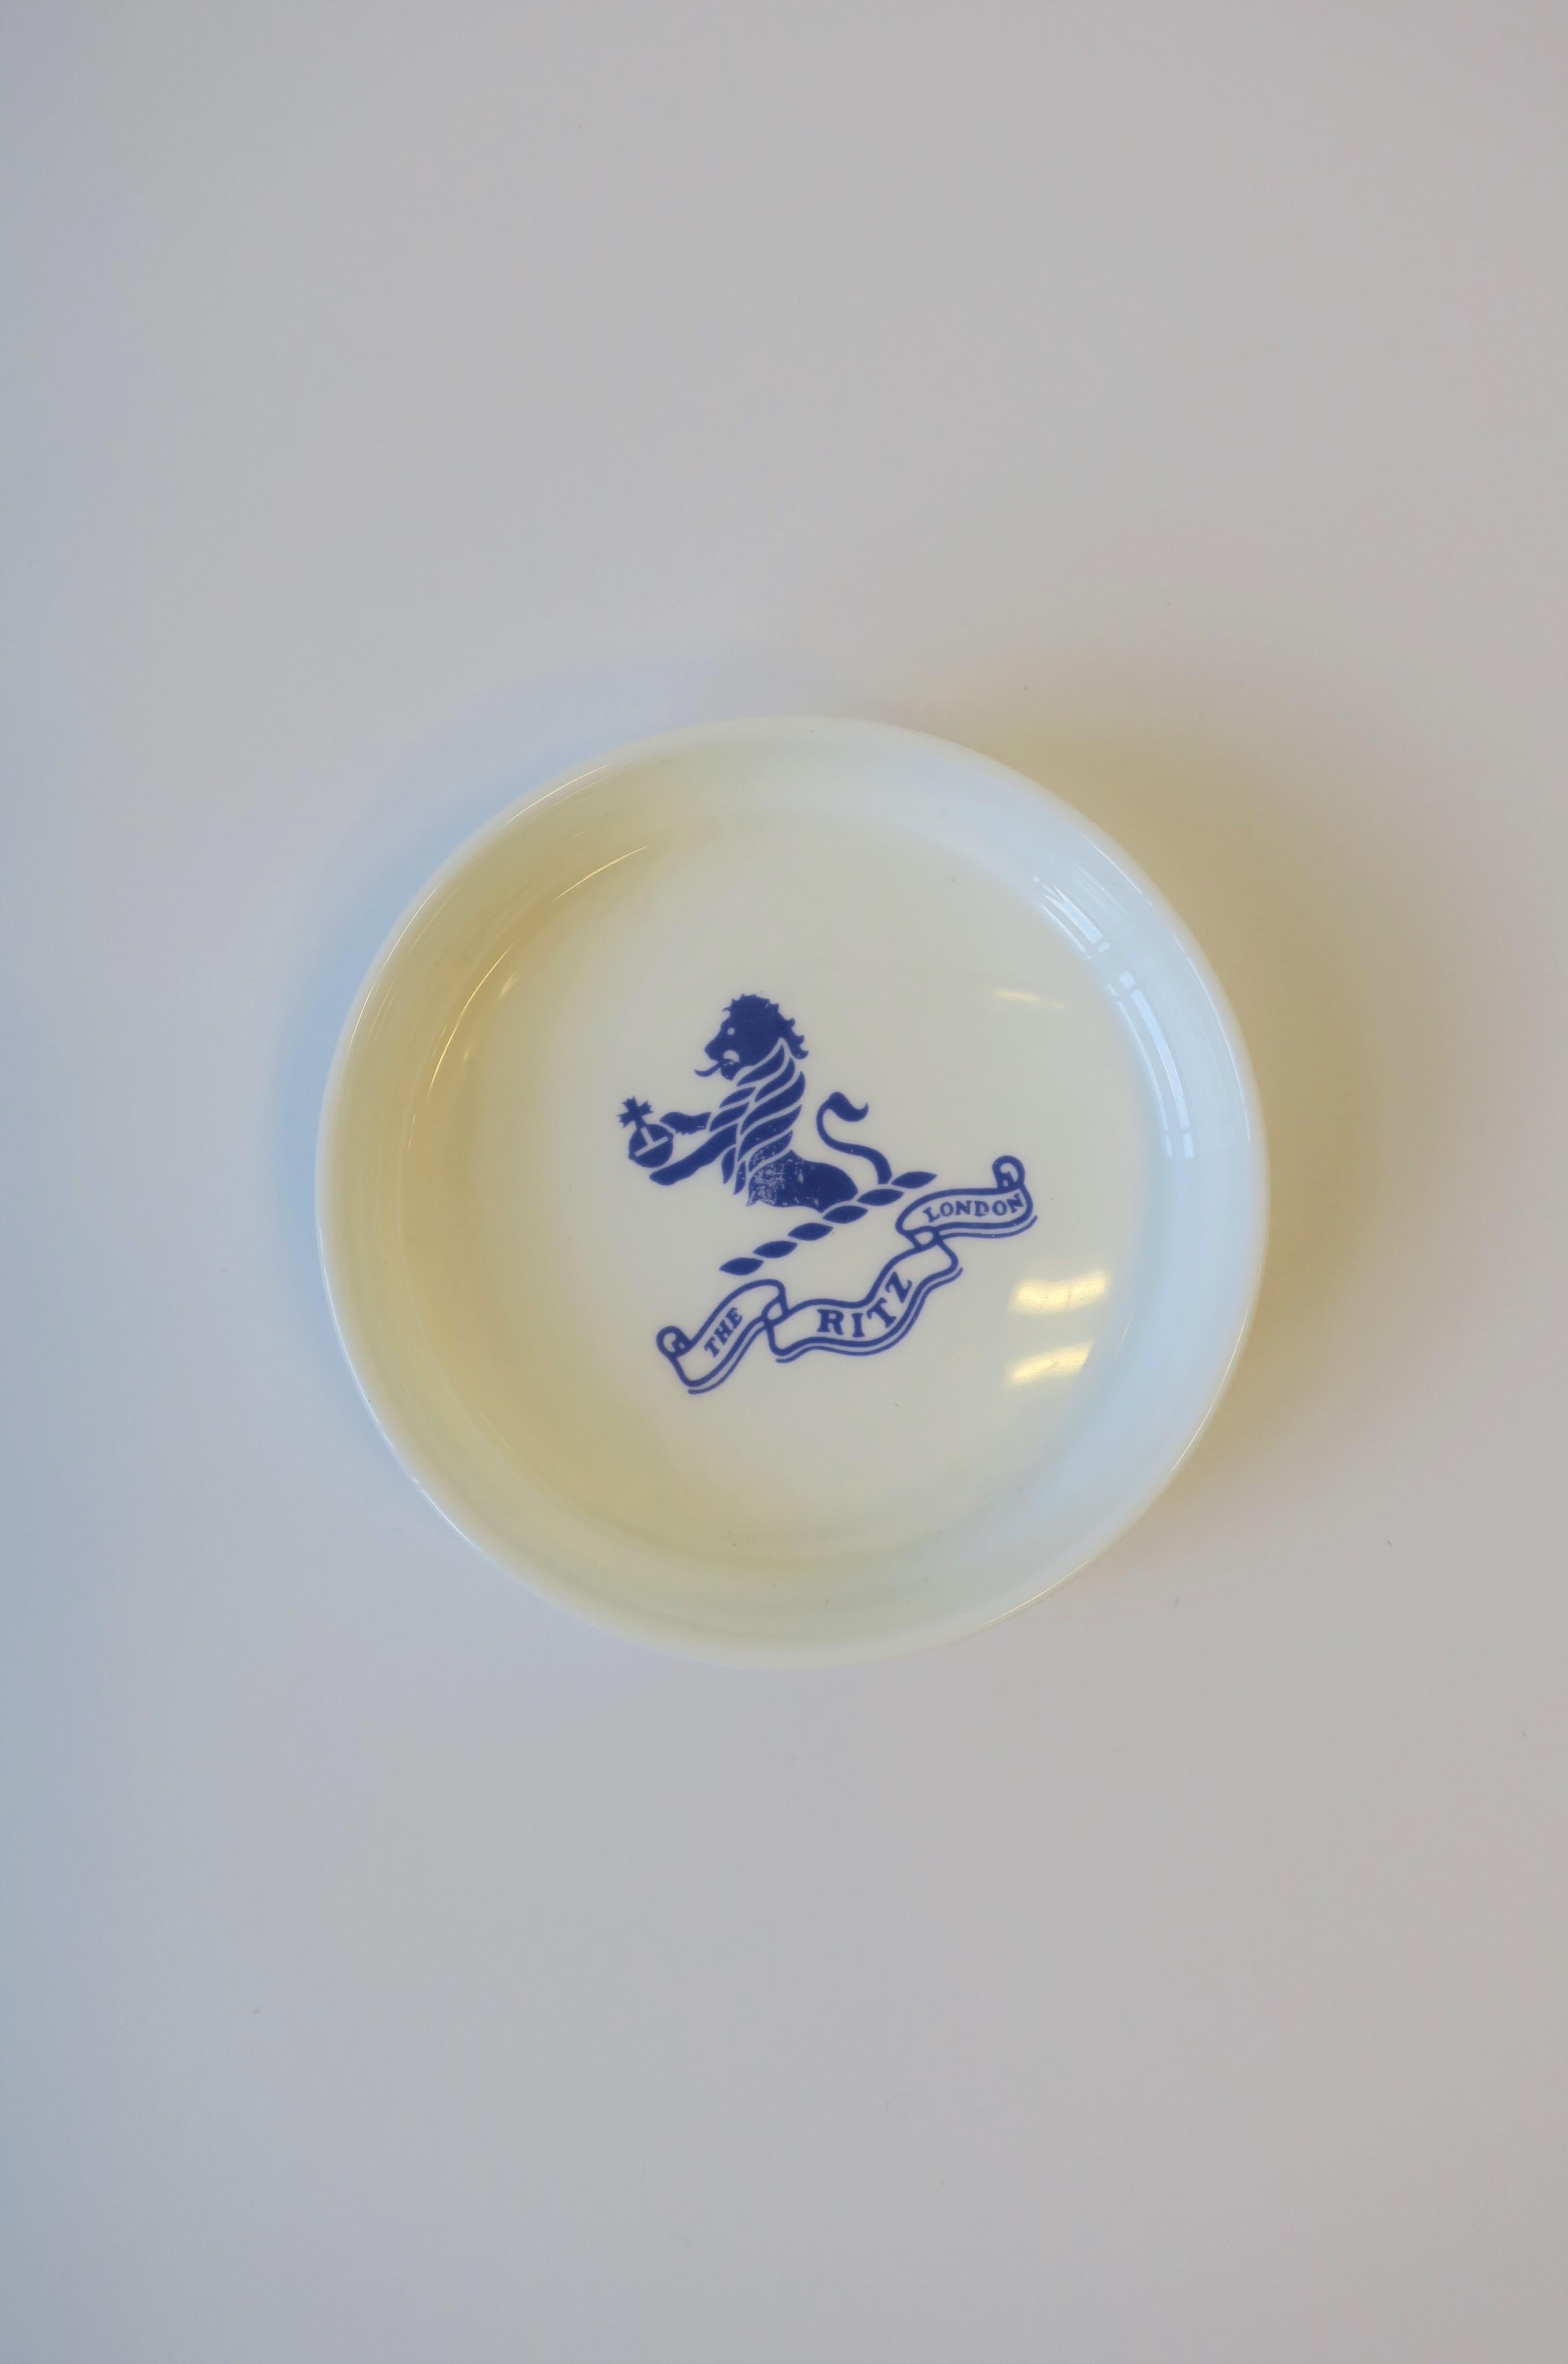 Glazed The Ritz London Blue and White Porcelain Jewelry Dish